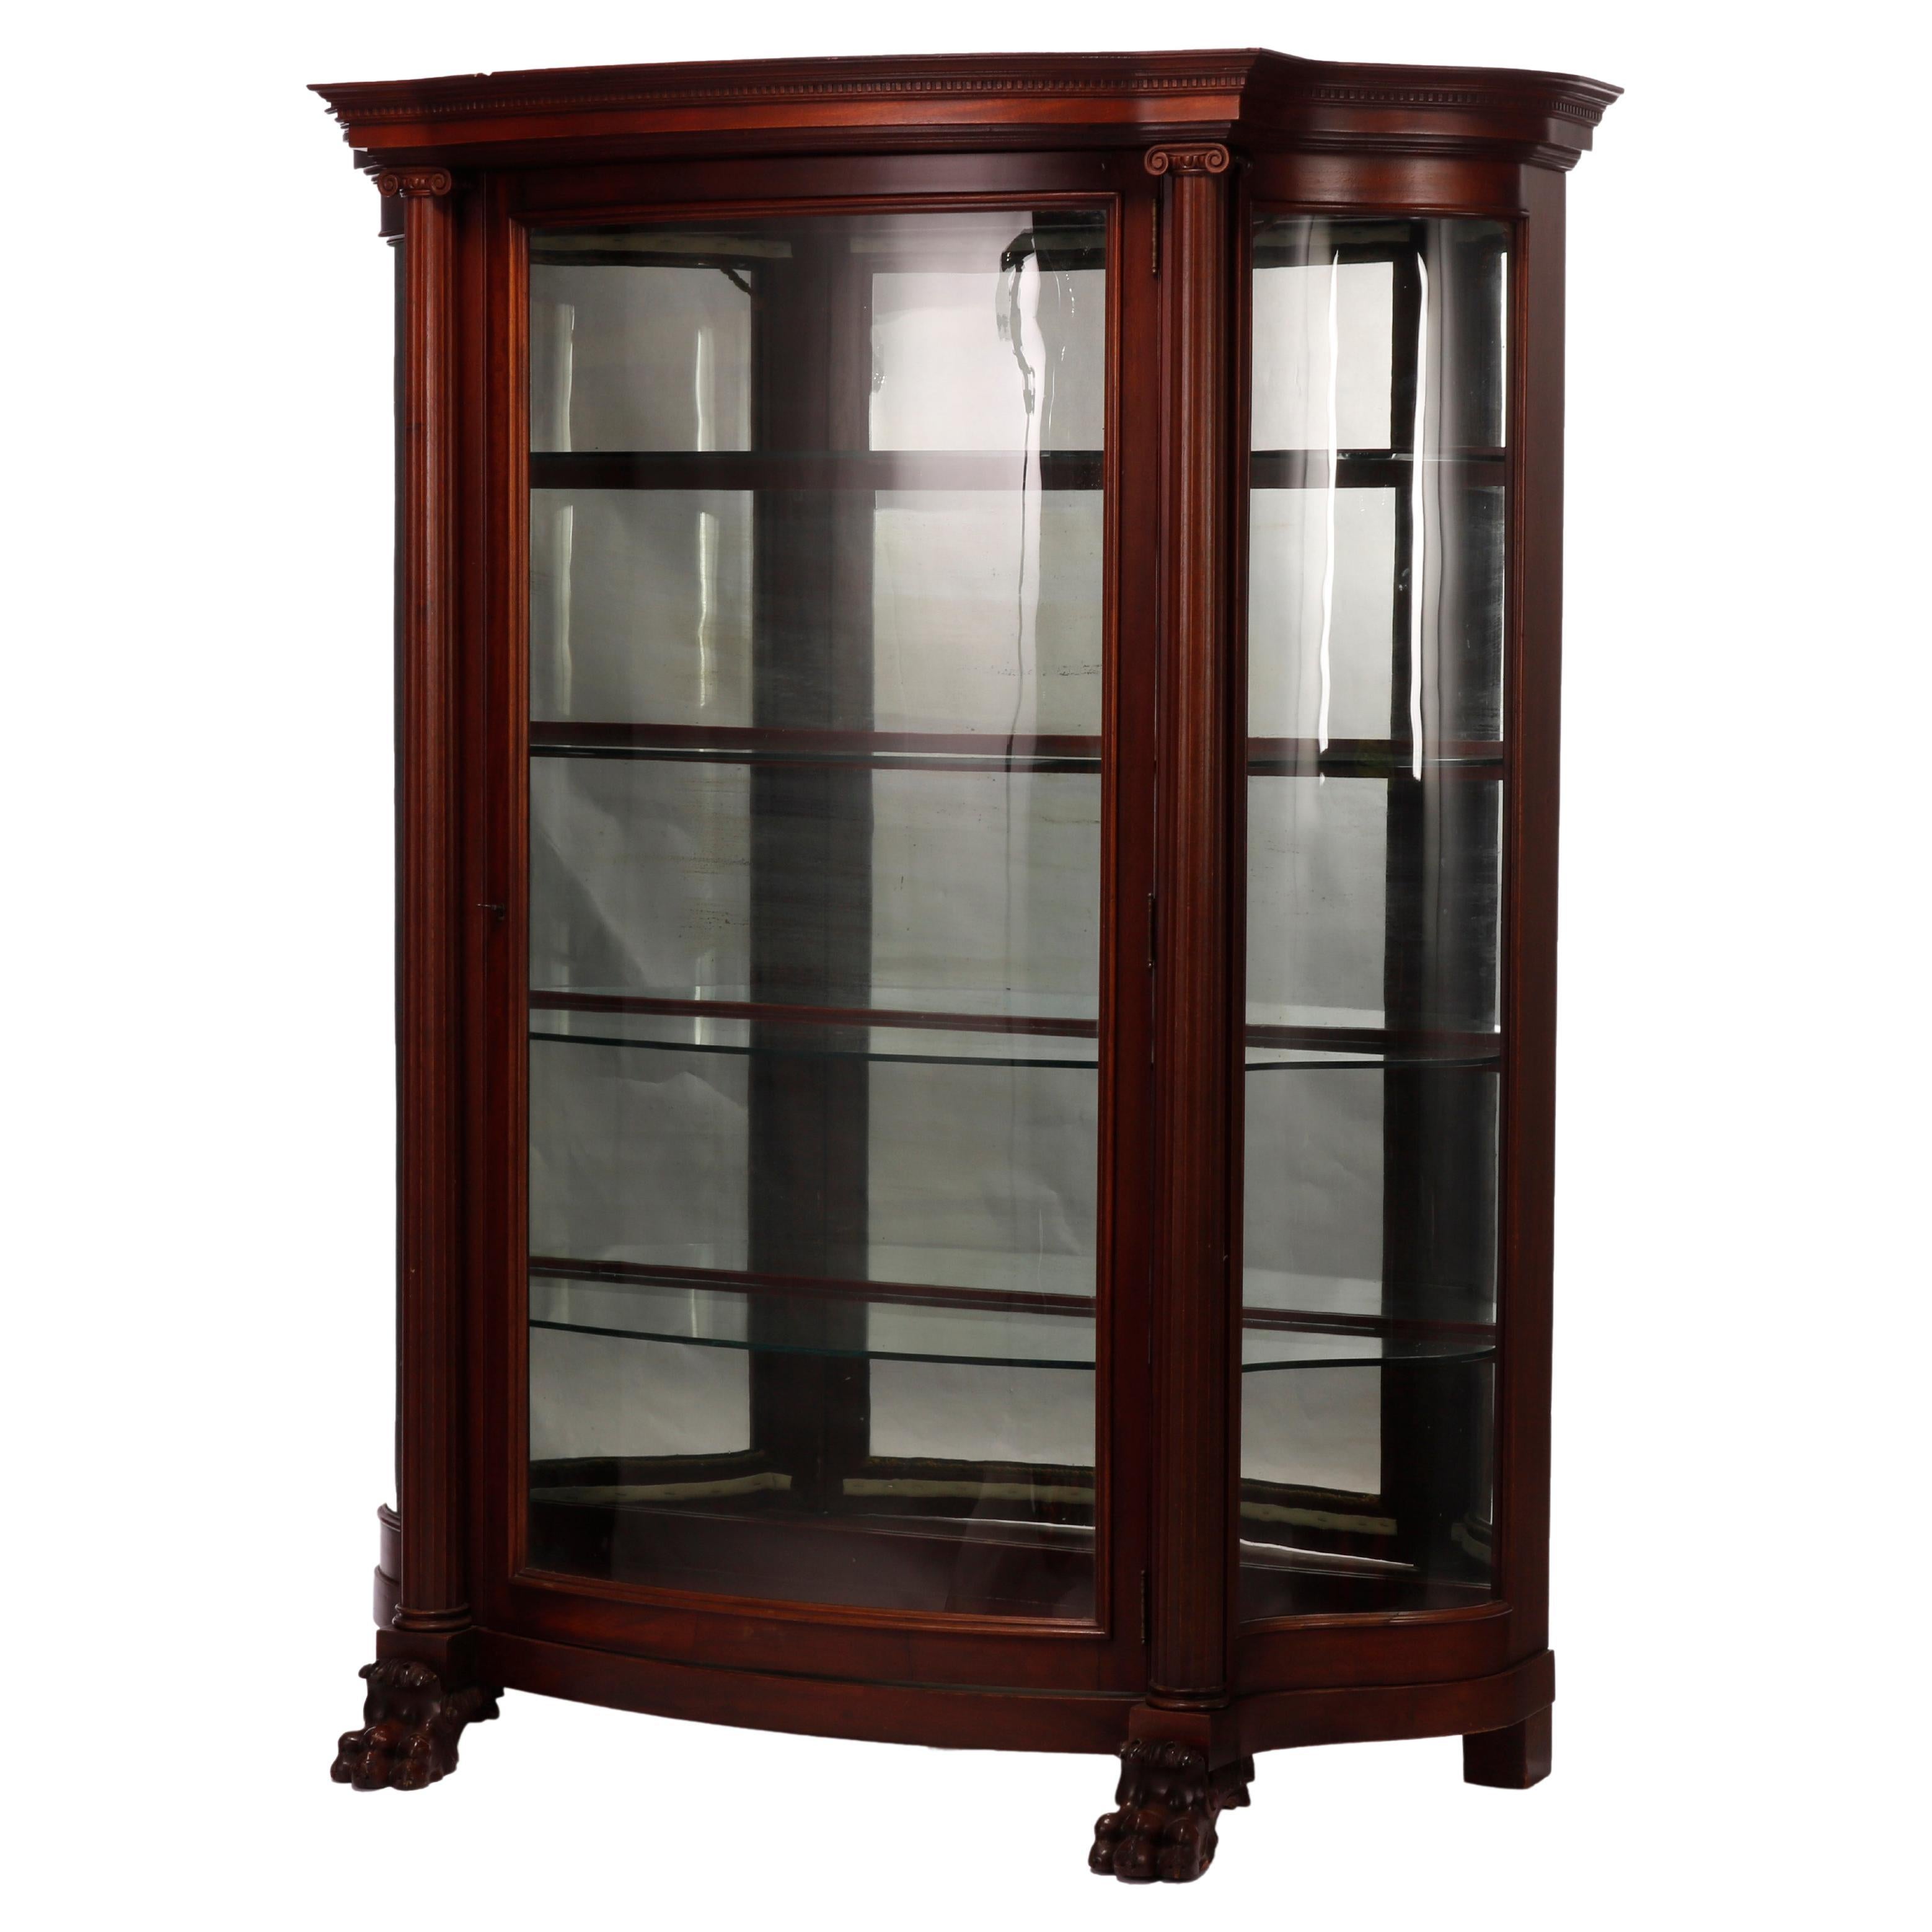 https://a.1stdibscdn.com/classical-carved-mahogany-oversized-serpentine-china-cabinet-circa-1900-for-sale/f_23963/f_273499921644721712814/f_27349992_1644721714256_bg_processed.jpg